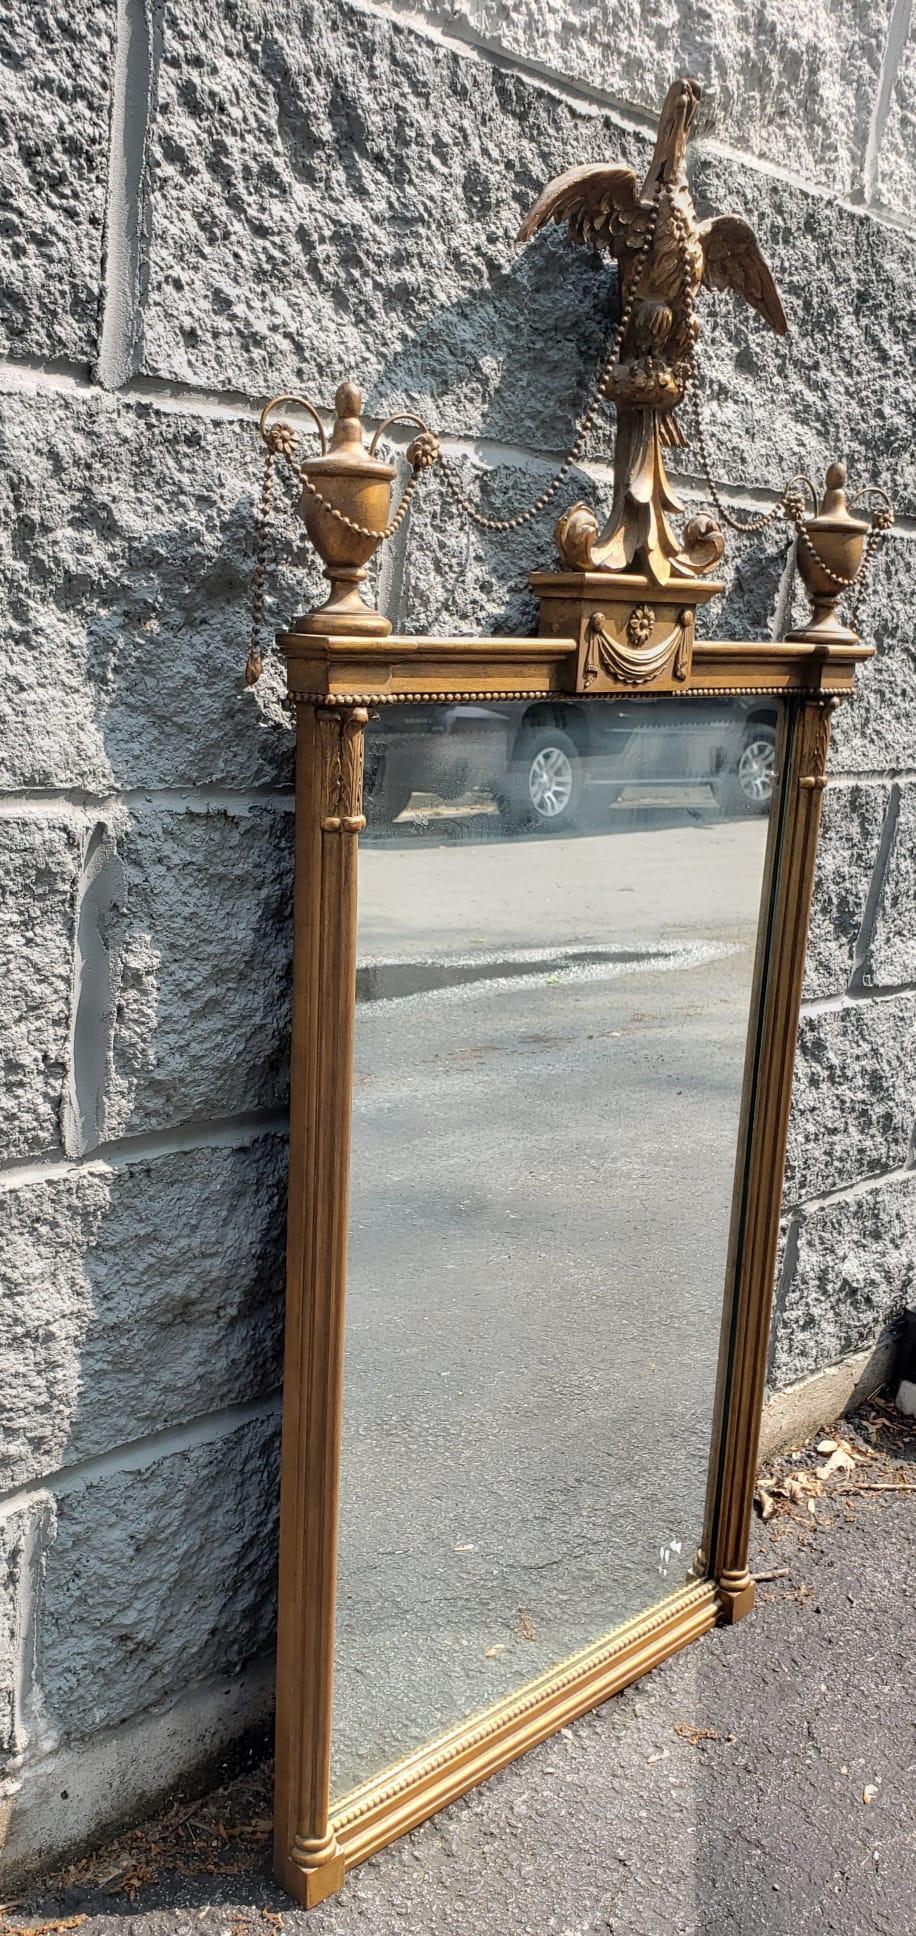 Early 20th Century Federal Style Gilt Decorated Eagle Pediment Frame Mirror In Good Condition For Sale In Germantown, MD